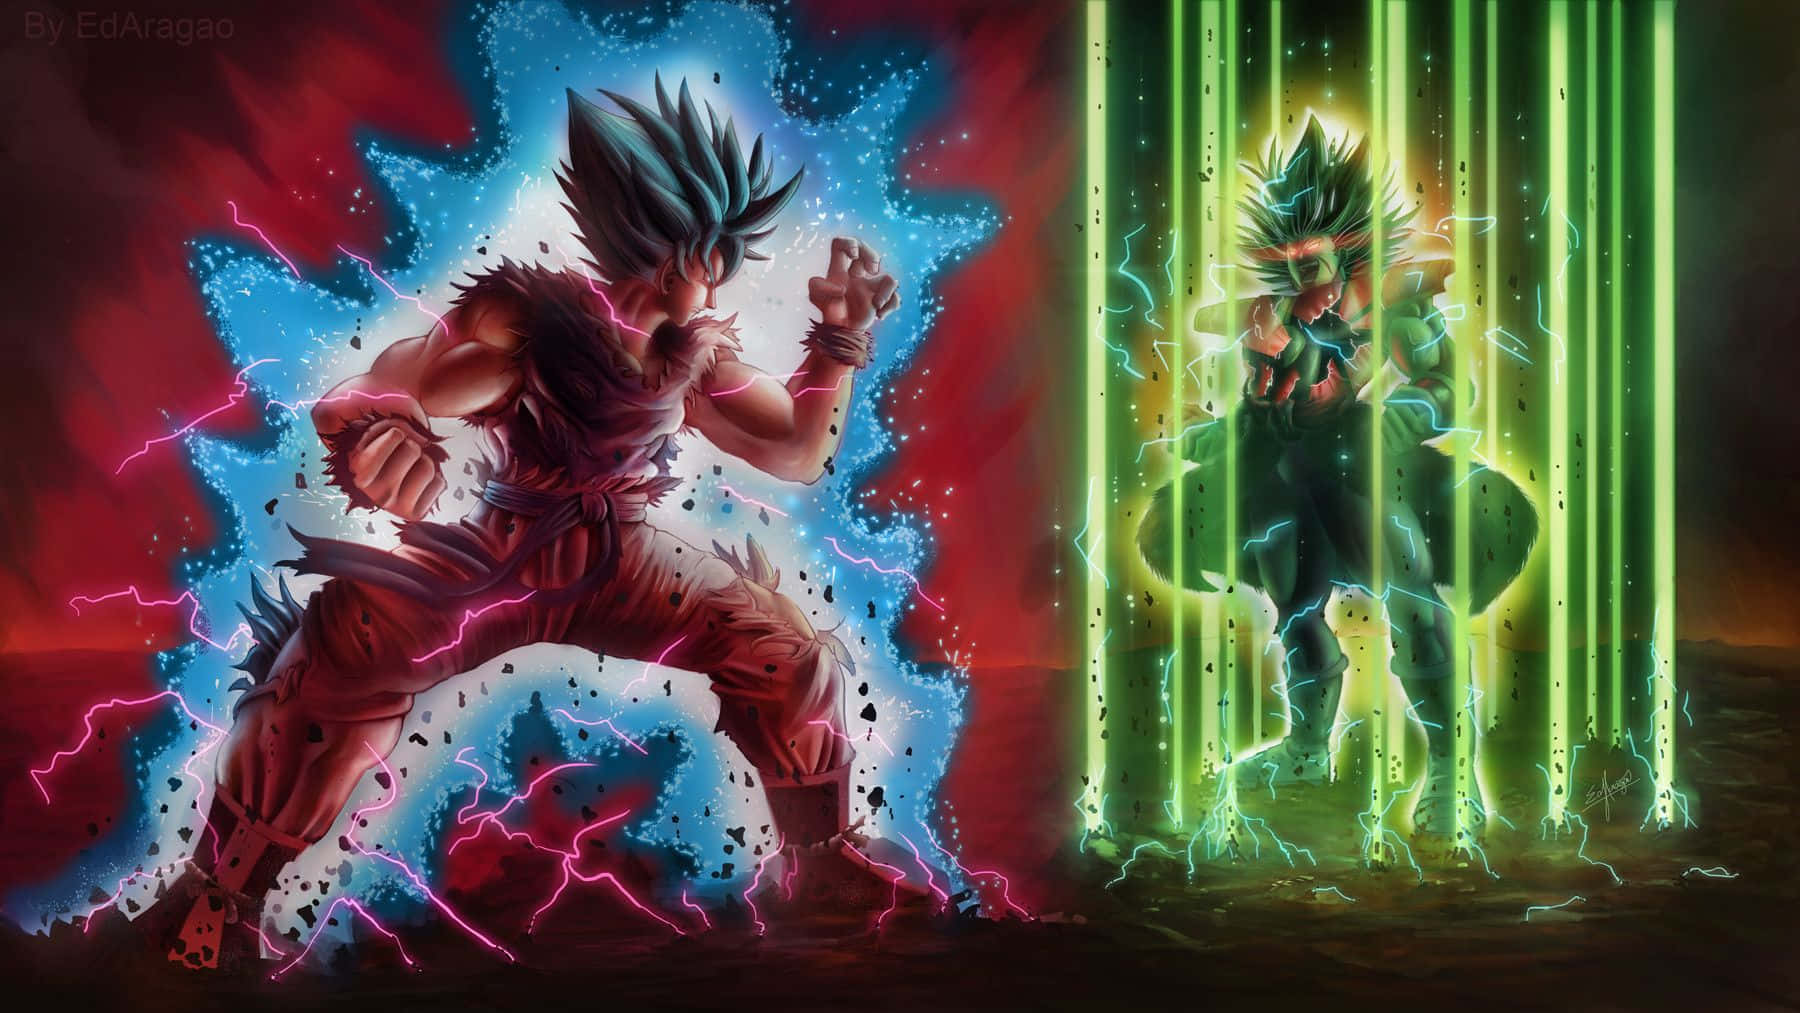 The Legendary Super Saiyan Broly in Action Wallpaper